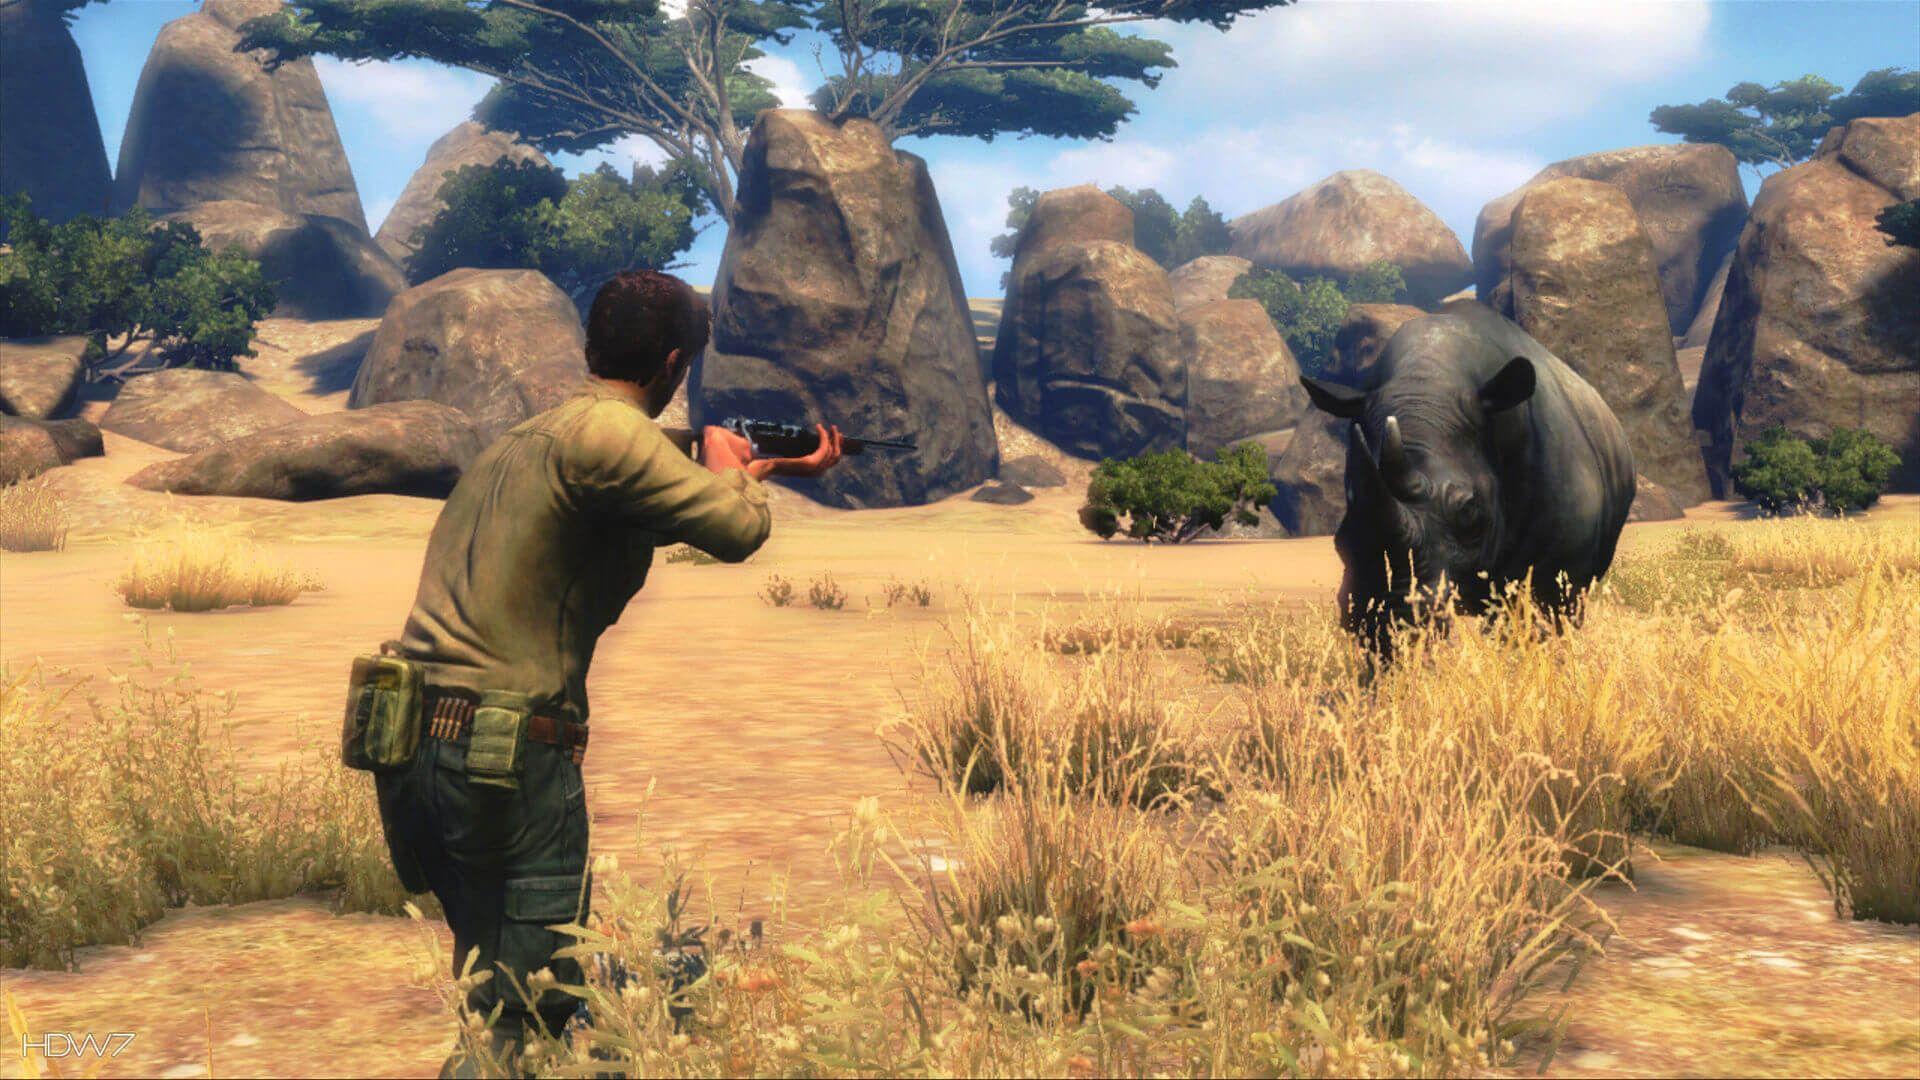 hunting game for pc free download